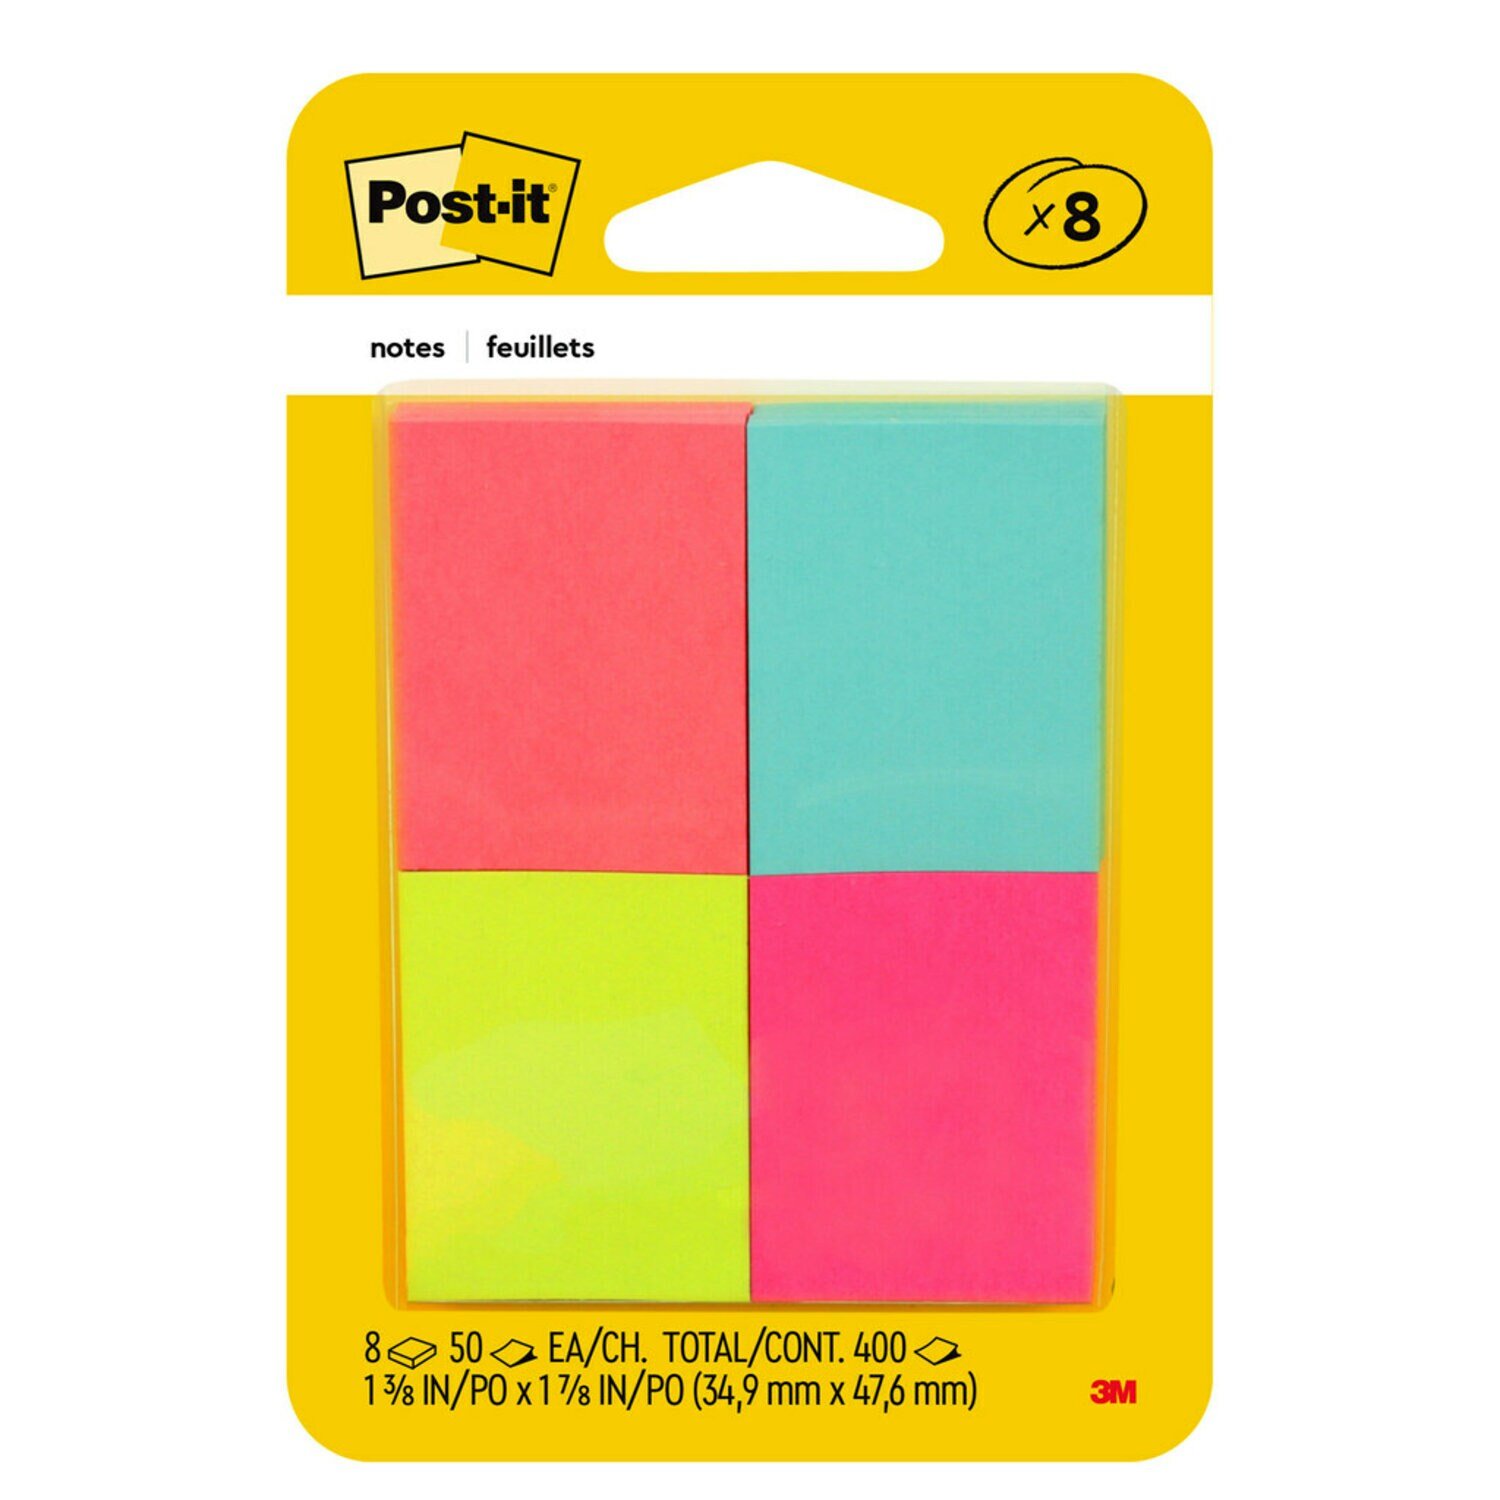 7010290101 - Post-it Notes 653-8AF, 1-3/8 in x 1-7/8 in (34,9 mm x 47,6 mm) Capetown
colors